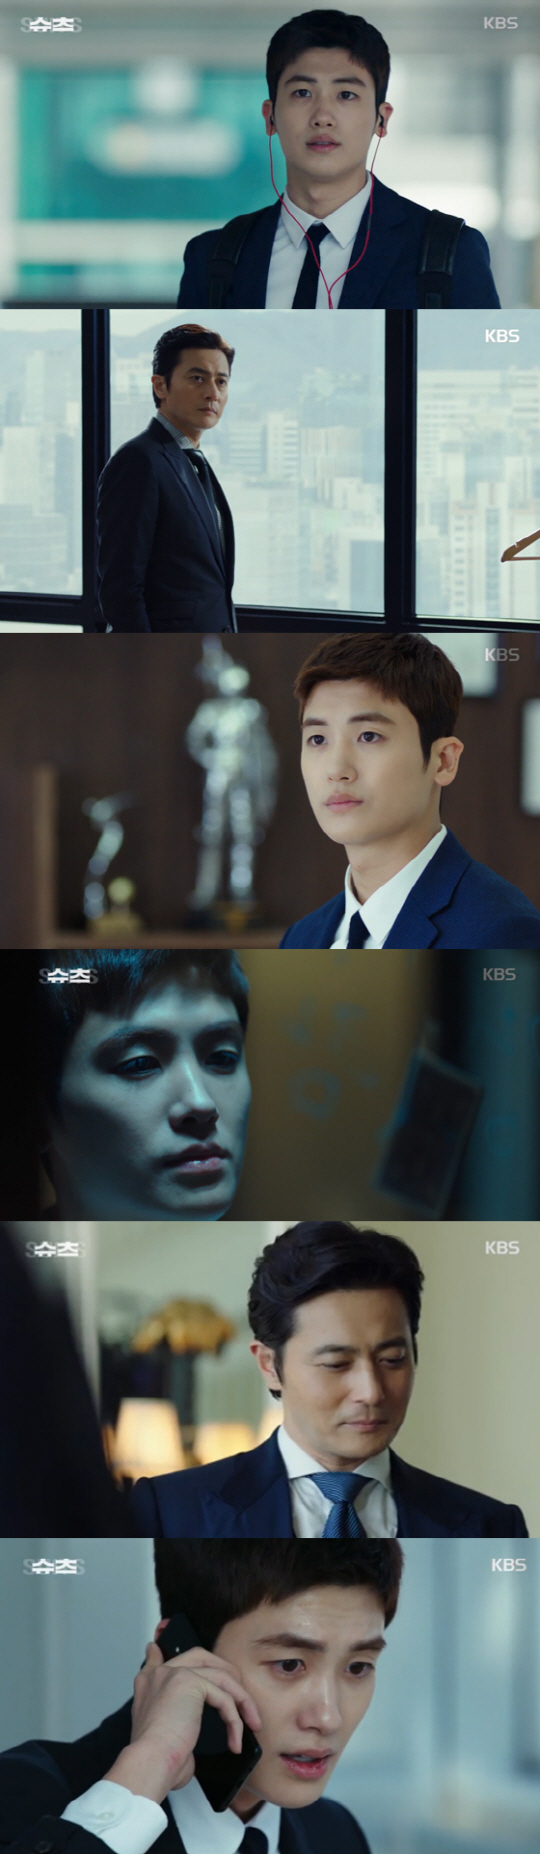 Park Hyung-sik heralded the birth of another life character with KBS2s new tree drama Suits; in Suits, Park Hyung-sik played Ko Yeon-woo.Ko Yeon-woo was trapped in a errand of errands of chaebol II to earn Grandmas Boy hospital expenses, and pretended to be an interview applicant for a new lawyer at a law firm to escape Danger.Park Hyung-sik succeeded in capturing viewers, showing solid growth in the second episode of the show.On Suits, which aired on the 26th, the first combiplay of Miniforce stone (Jang Dong-gun) and Ko Yeon-woo was drawn.Miniforce tried to cut off the weakness, Ko Yeon-woo, when he was put on Danger to be cancelled at the promotion Danger; however, Ko Yeon-woo cleverly put the Miniforce seat on.Miniforce, who was attracted to Ko Yeon-woo, who resembled himself, decided to work with him on a pro bono case for sexual hazard Victims at work.Ko Yeon-woo listened to his story on the side of Sexual Harassment Victims and was busy trying to solve the case.Miniforce had a sharp sense of situation, and the chairman of the conglomerate who drove him into Danger dropped the complaint.Unlike the original character of full-set setting, he showed his base in sneakers in accordance with the setting of being from the first broadcast, and he exquisitely caught the atmosphere of emotions that changed at moments, such as the desperation to escape from the tight reality, the passion and passion of the new recruit, and the curiosity to approach the essence of the event.Sister - The dumb that stimulates the motherhood of aunt fans still remained.The world pretended to be a dirty, cynical pretender, but he squatted beside Grandmas Boy, who was hospitalized, or made a character with a warm heart that even a friend who betrayed him could not calmly express himself.Park Hyung-siks unique dumb has become a factor that doubles the characters saltiness.It is still poor and lacking, but it is widely believed that he wants to support the performance of Ko Yeon-woo, who will hold the hands of Miniforce, who is going to grow up. Park Hyung-sik is a considerable effort.Starting with SBS Remember You in 2012, I challenged the acting, and took steps from the child and supporting actor.In 2014, KBS2 Why are you family together and SBS Upper Society in 2015 became the leading actor.As I have been polishing my work in the field for a long time, I have continued my syndrome without any controversy about the common acting ability even though I became a leading actor.In 2016, KBS2 Gallery caused trivenous disease, and last year JTBC Power Woman Dobong Soon also created Minhyuk.